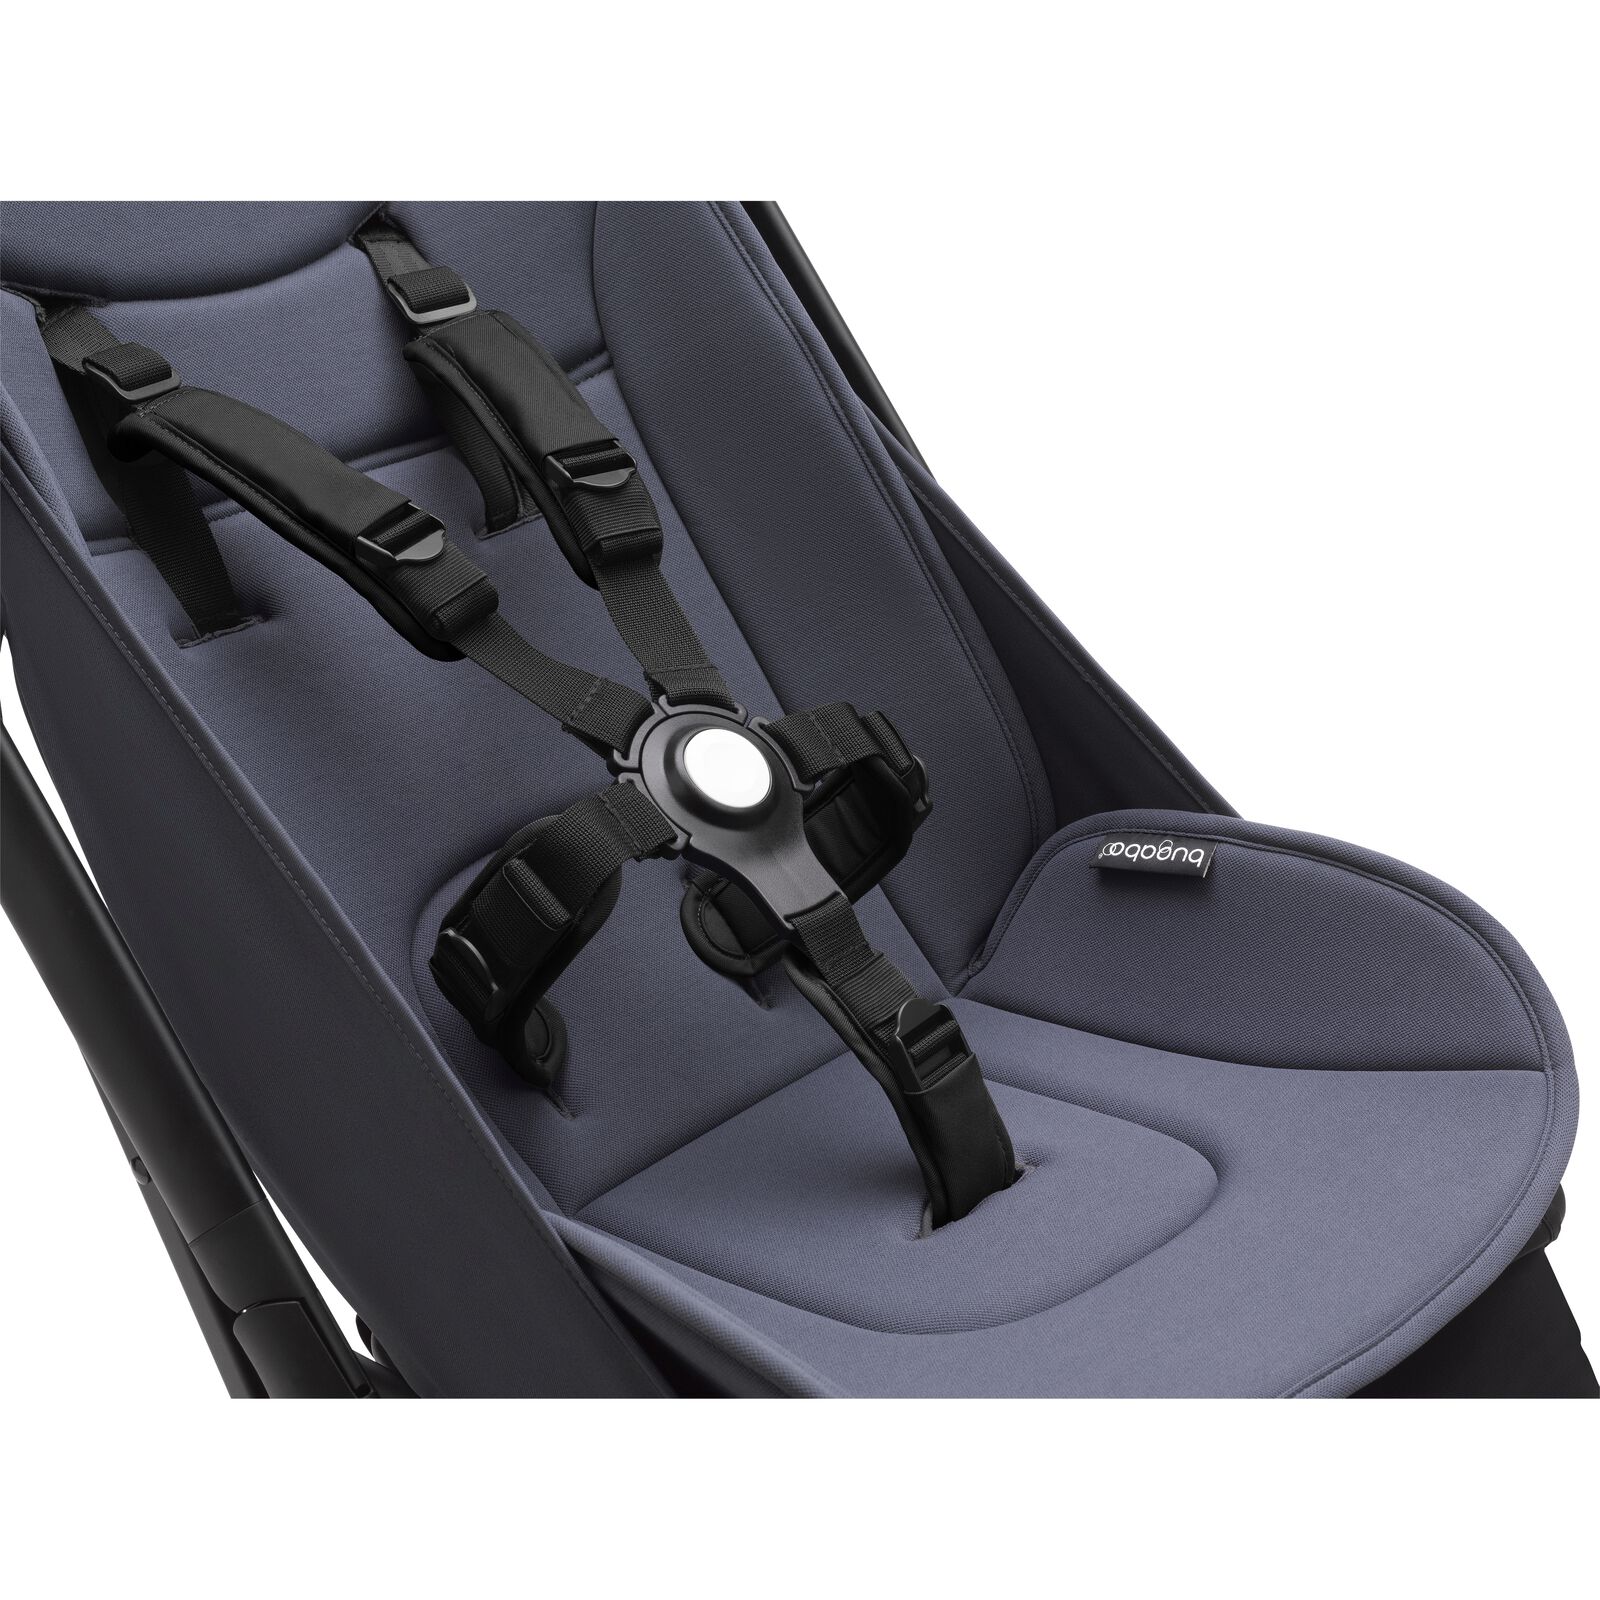 Bugaboo Butterfly seat pram - View 10